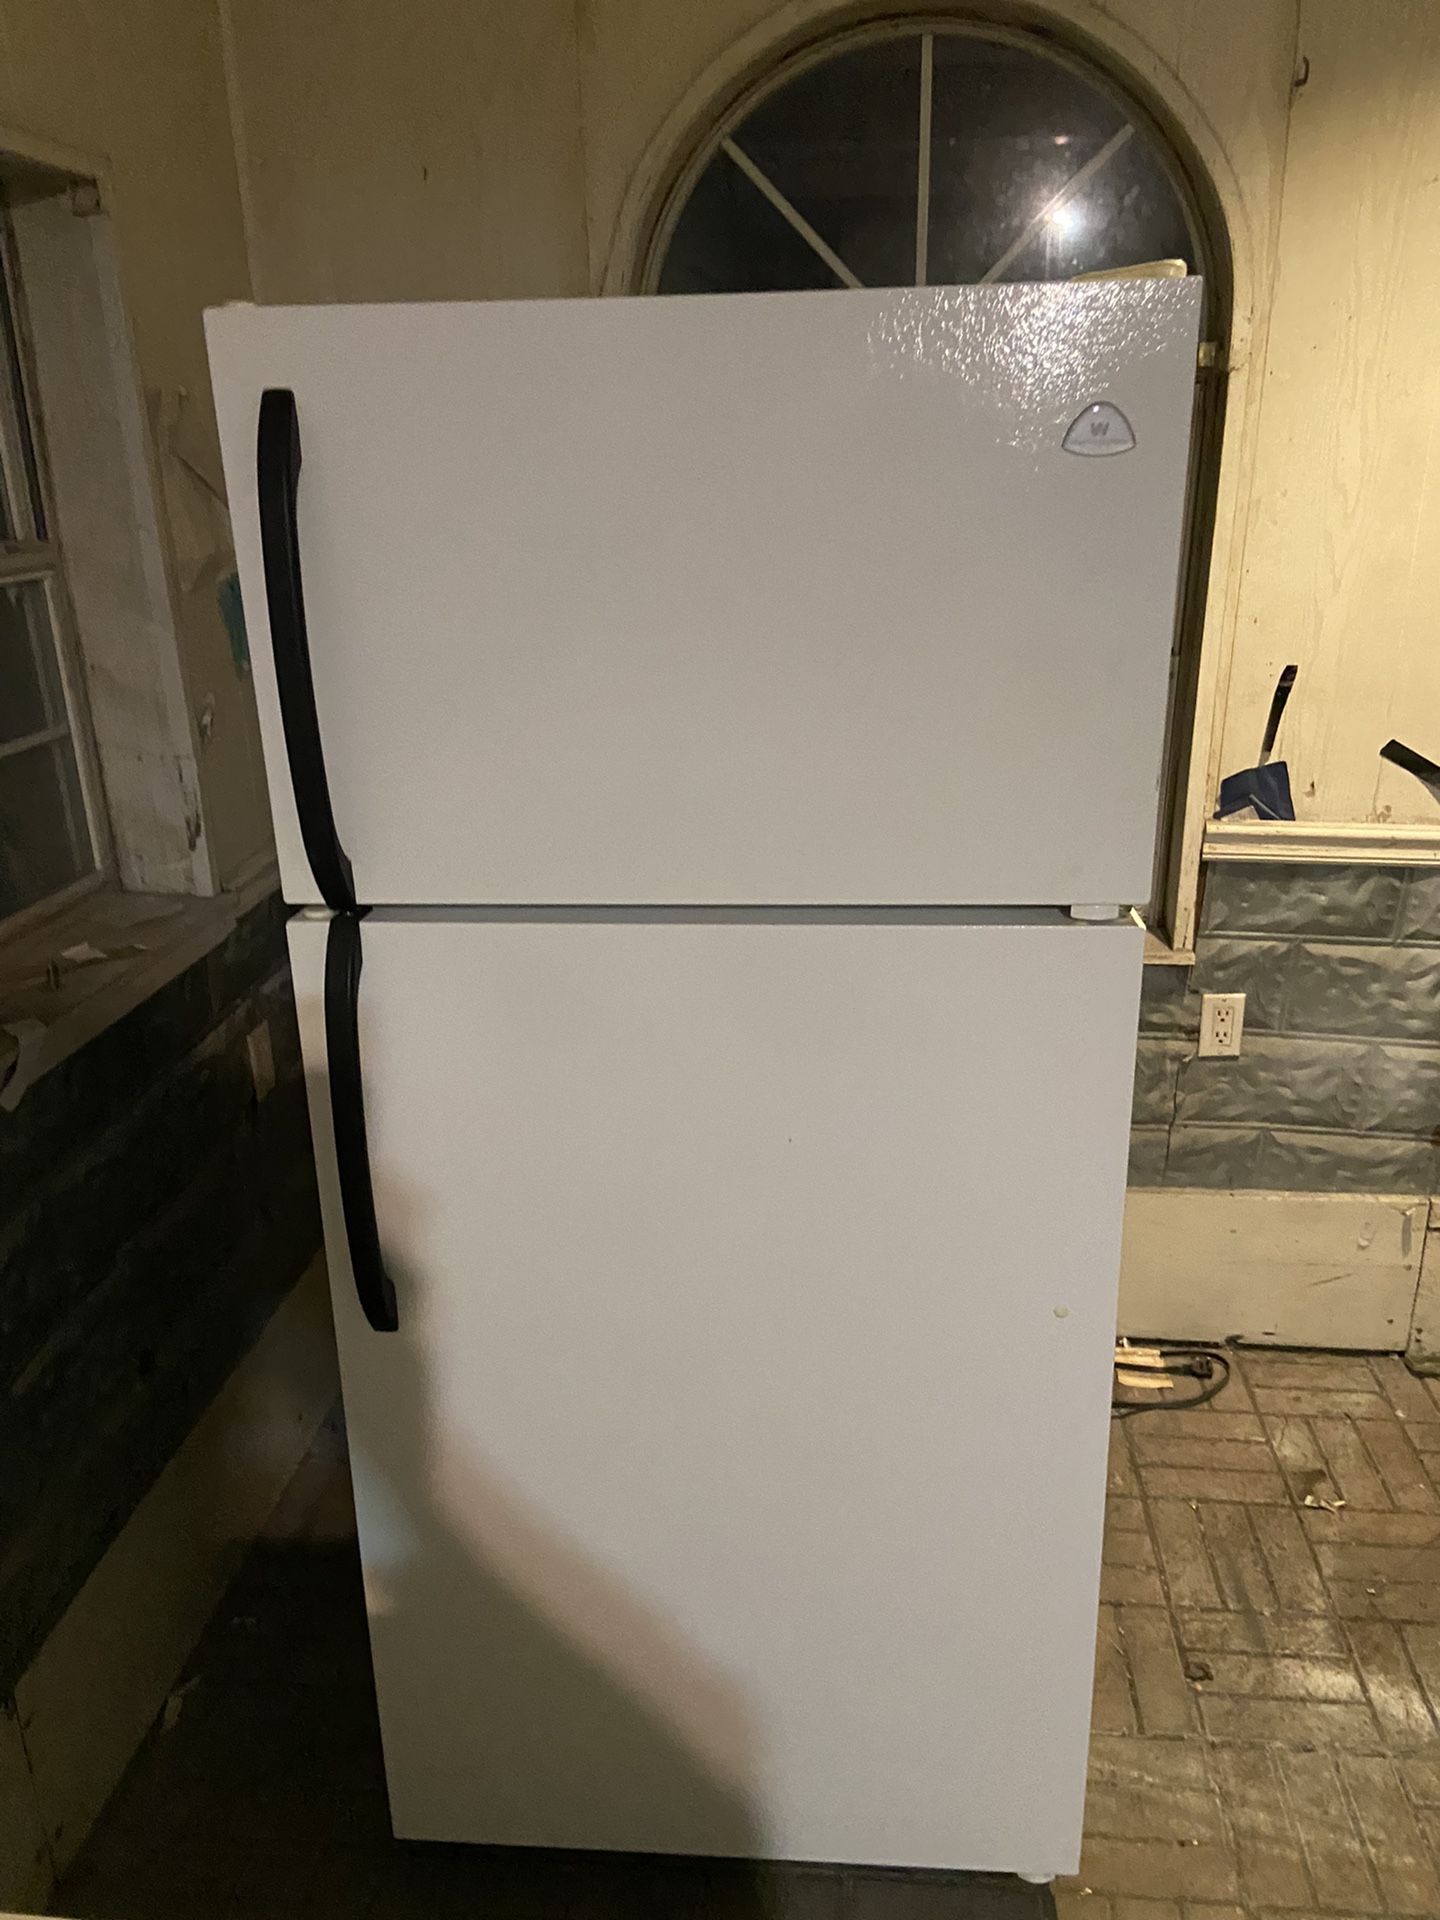 EXCELLENT RUNNING  WHITE FRIDGE! FRIDGE & FREEZER SECTIONS WORK PERFECTLY! 18 CU. FT. WHITE WESTING HOUSE IS BRAND! Will show it running! I’m in marre